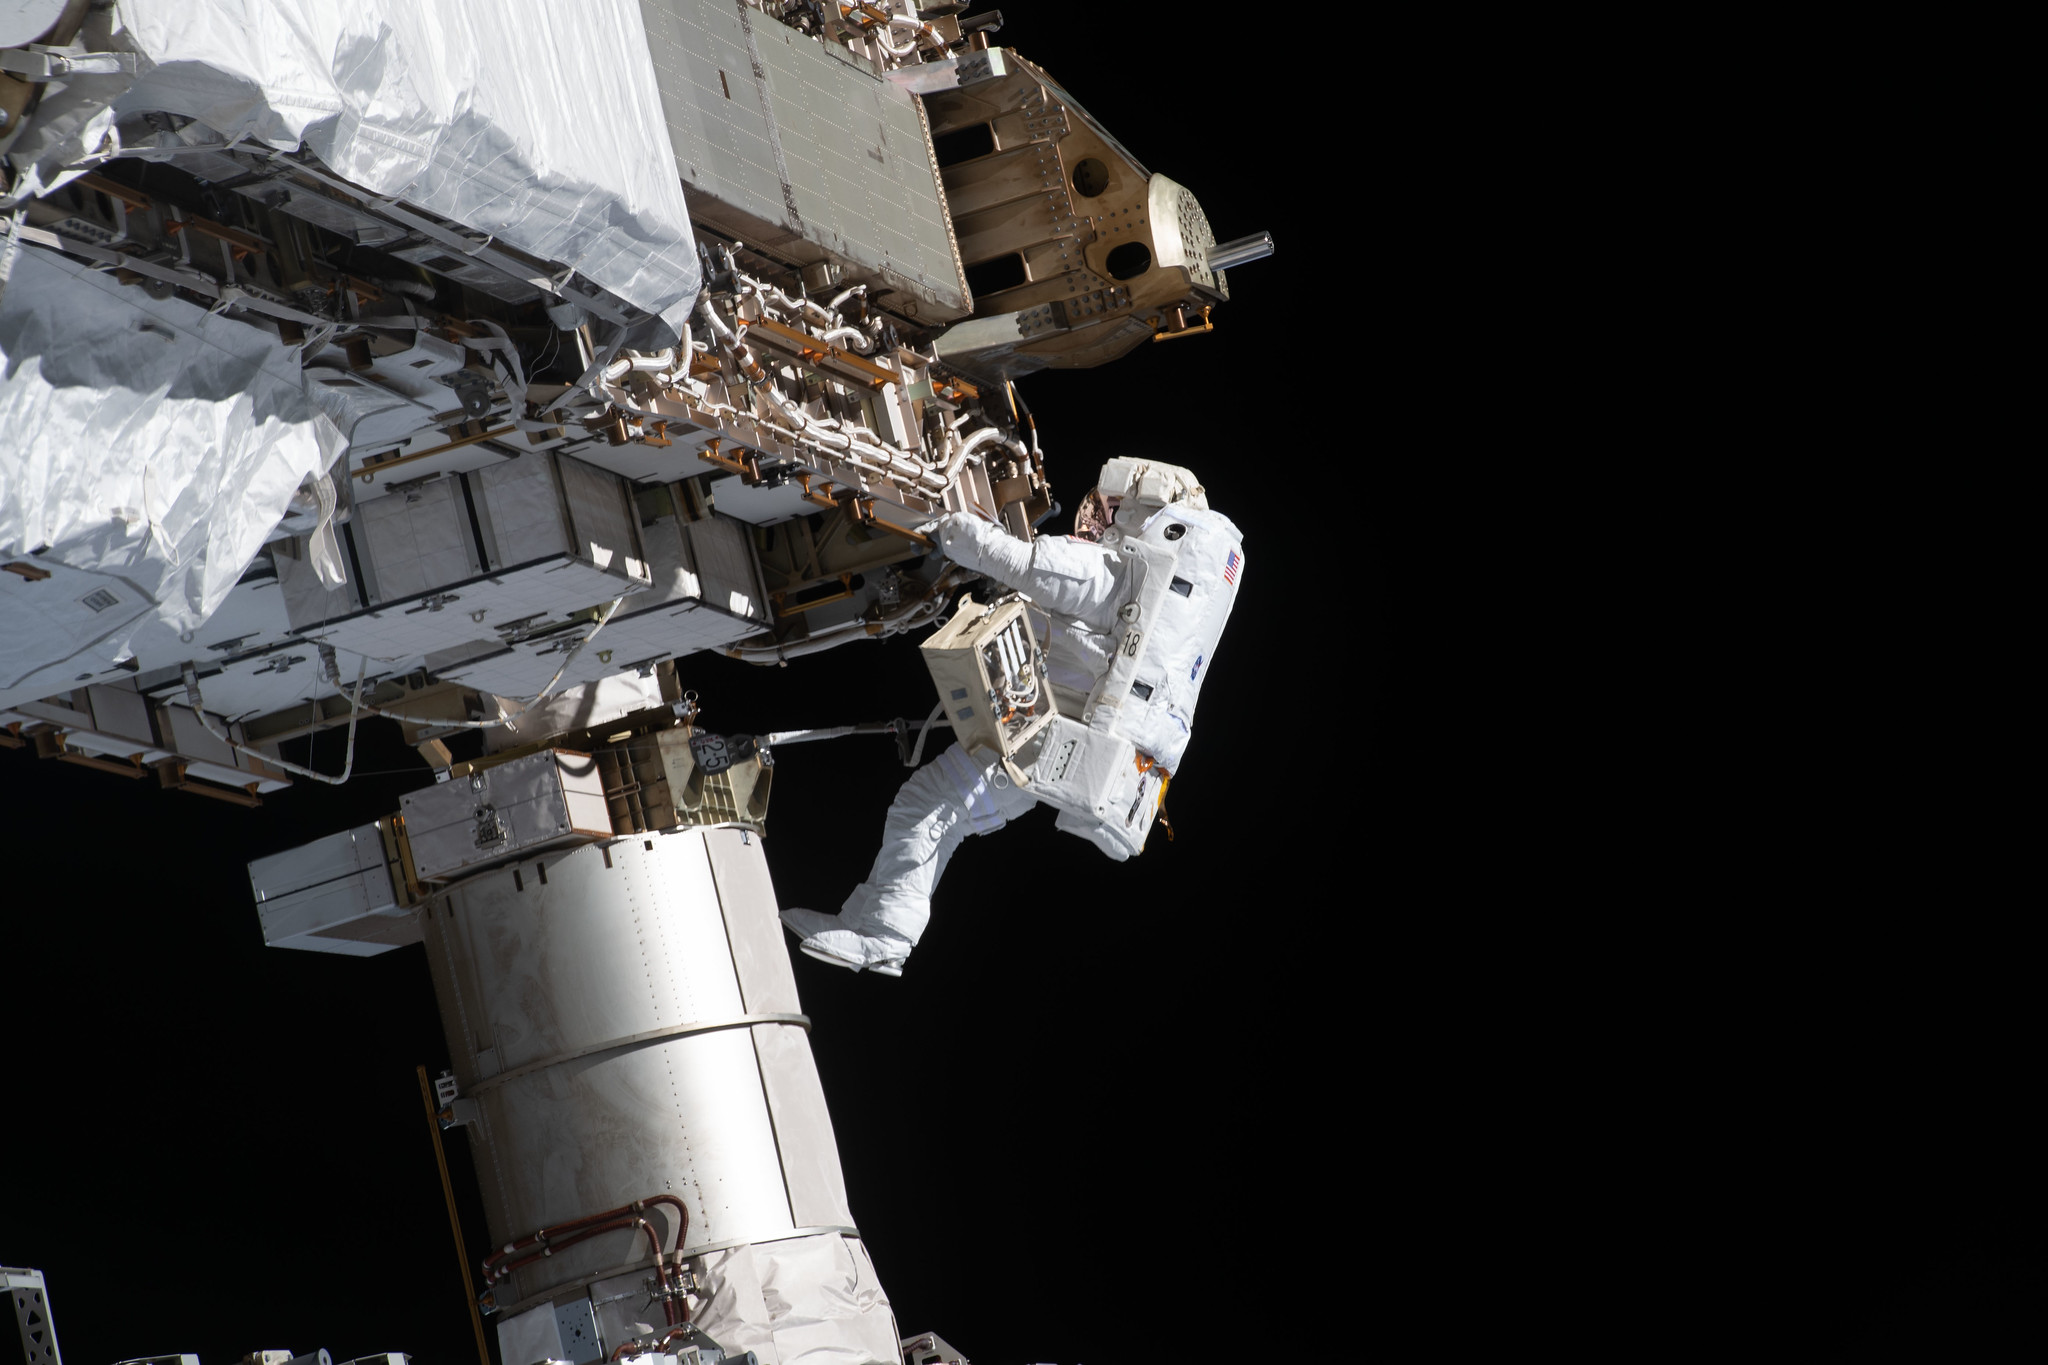 NASA spacewalker and Expedition 64 Flight Engineer Victor Glover works to ready the International Space Station's port-side truss structure for future solar array upgrades.